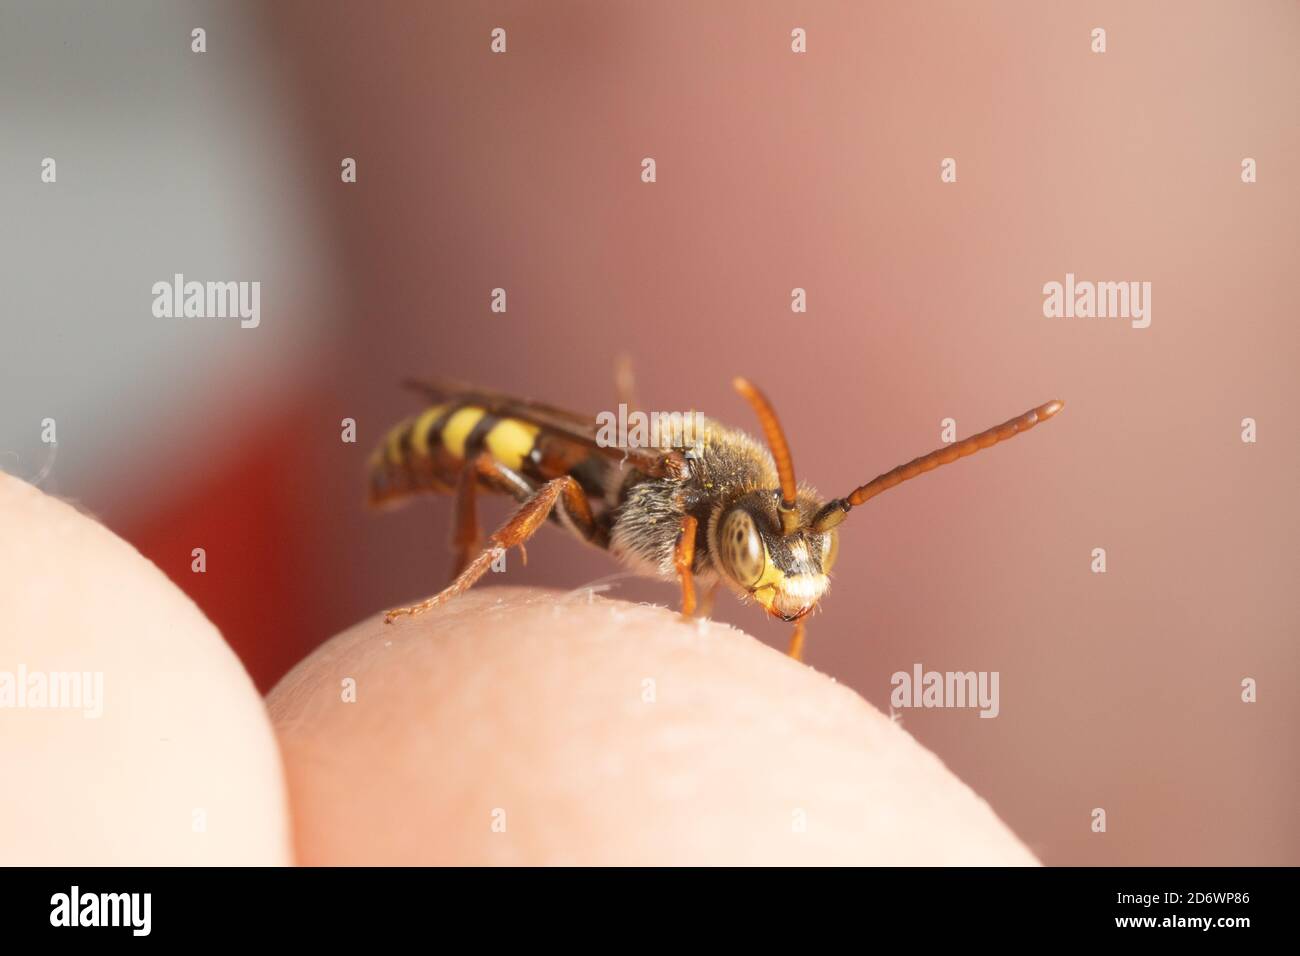 Nomad bee sitting on child's hand. The small things that run the world. Stock Photo